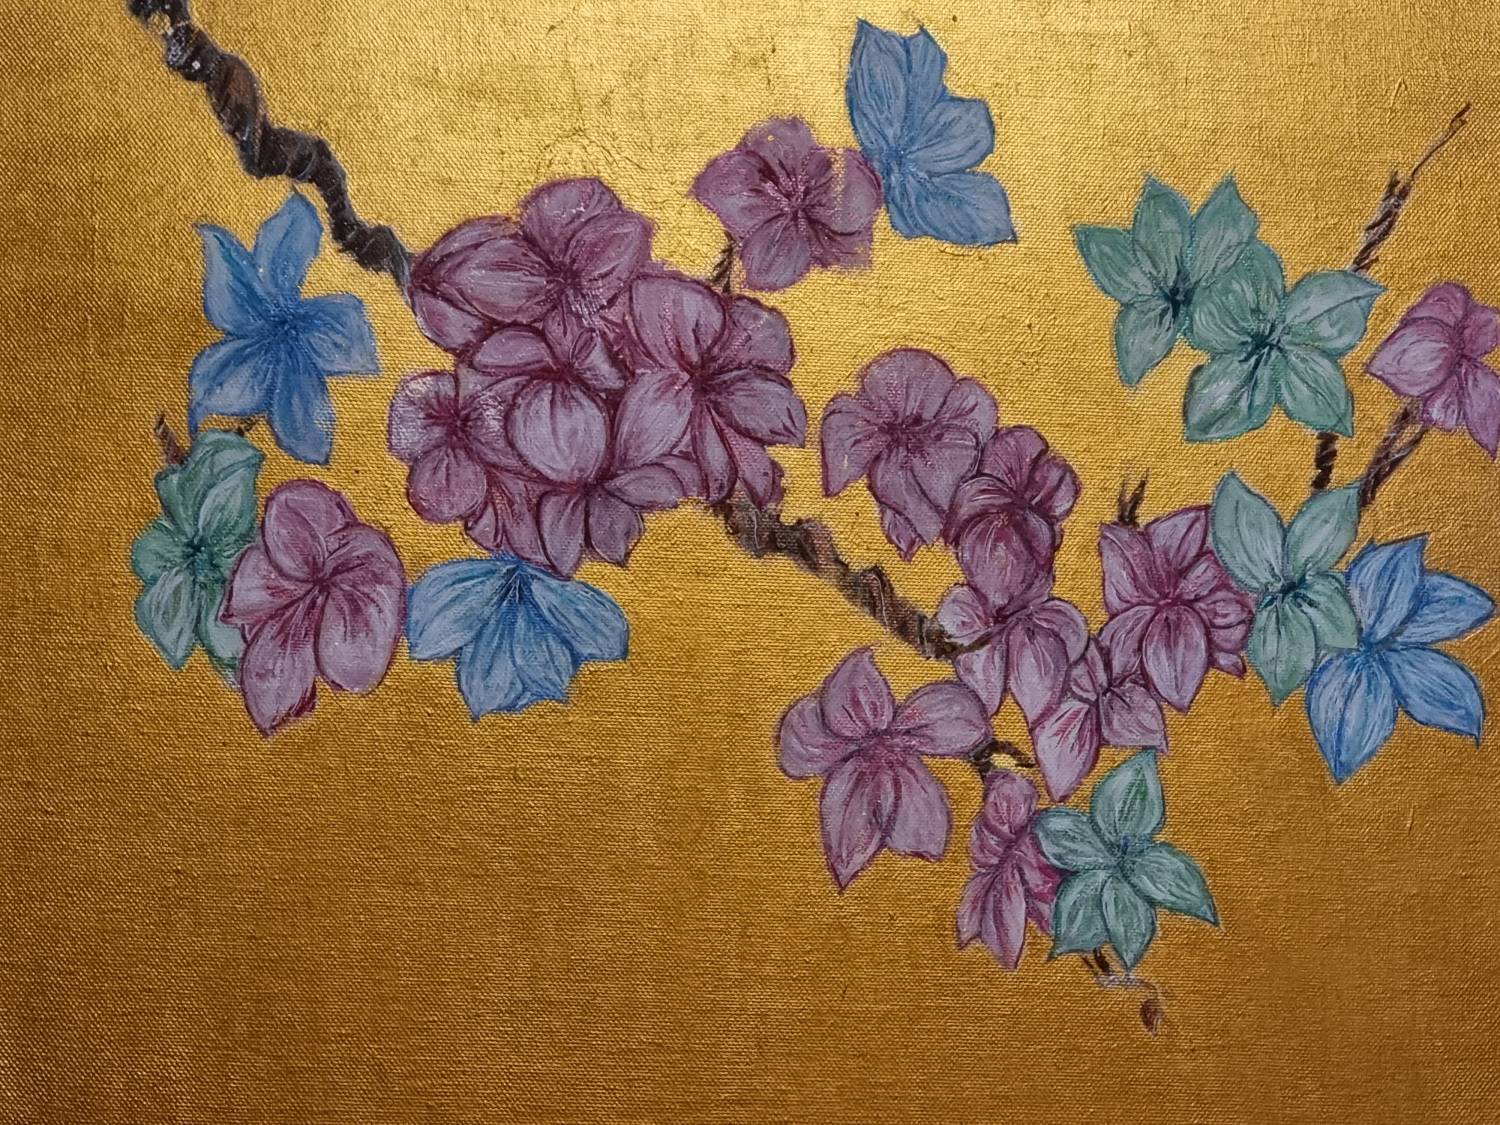 Alejandro Lopez' piece, "3 Colors," which features pink, blue and green flowers with a gold background.